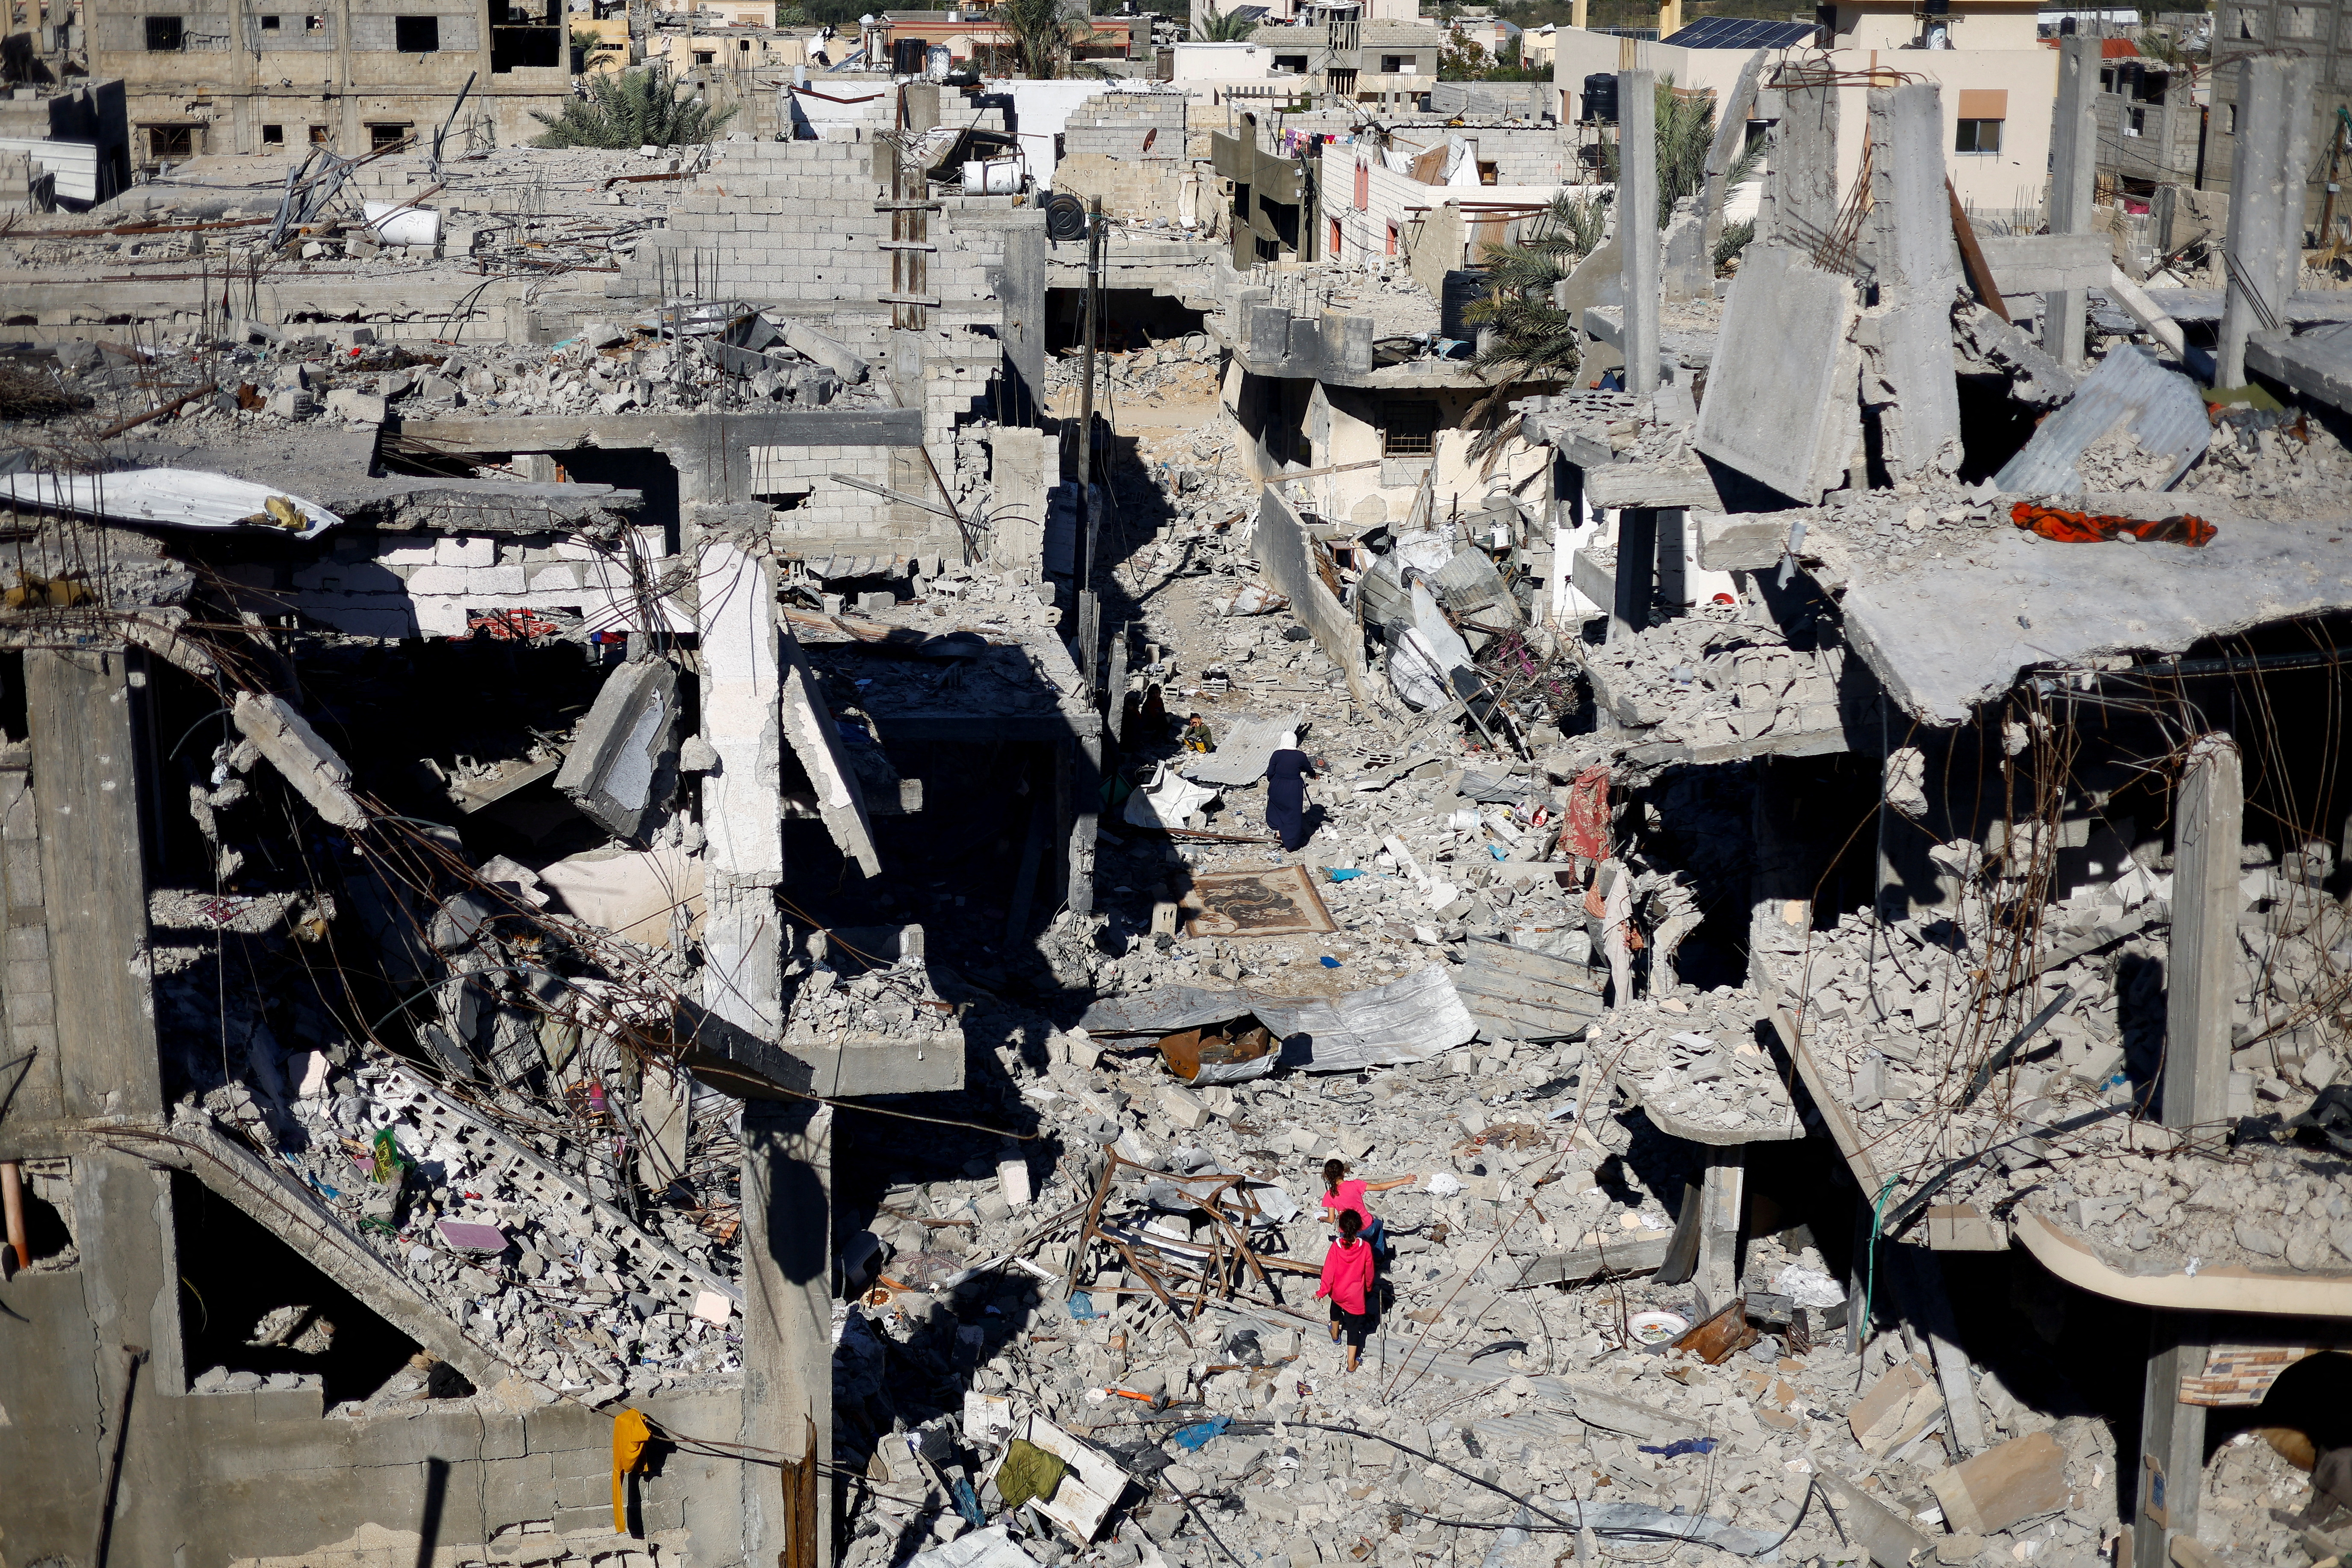 Palestinian children walk among the houses destroyed in Israeli strikes, at Khan Younis refugee camp